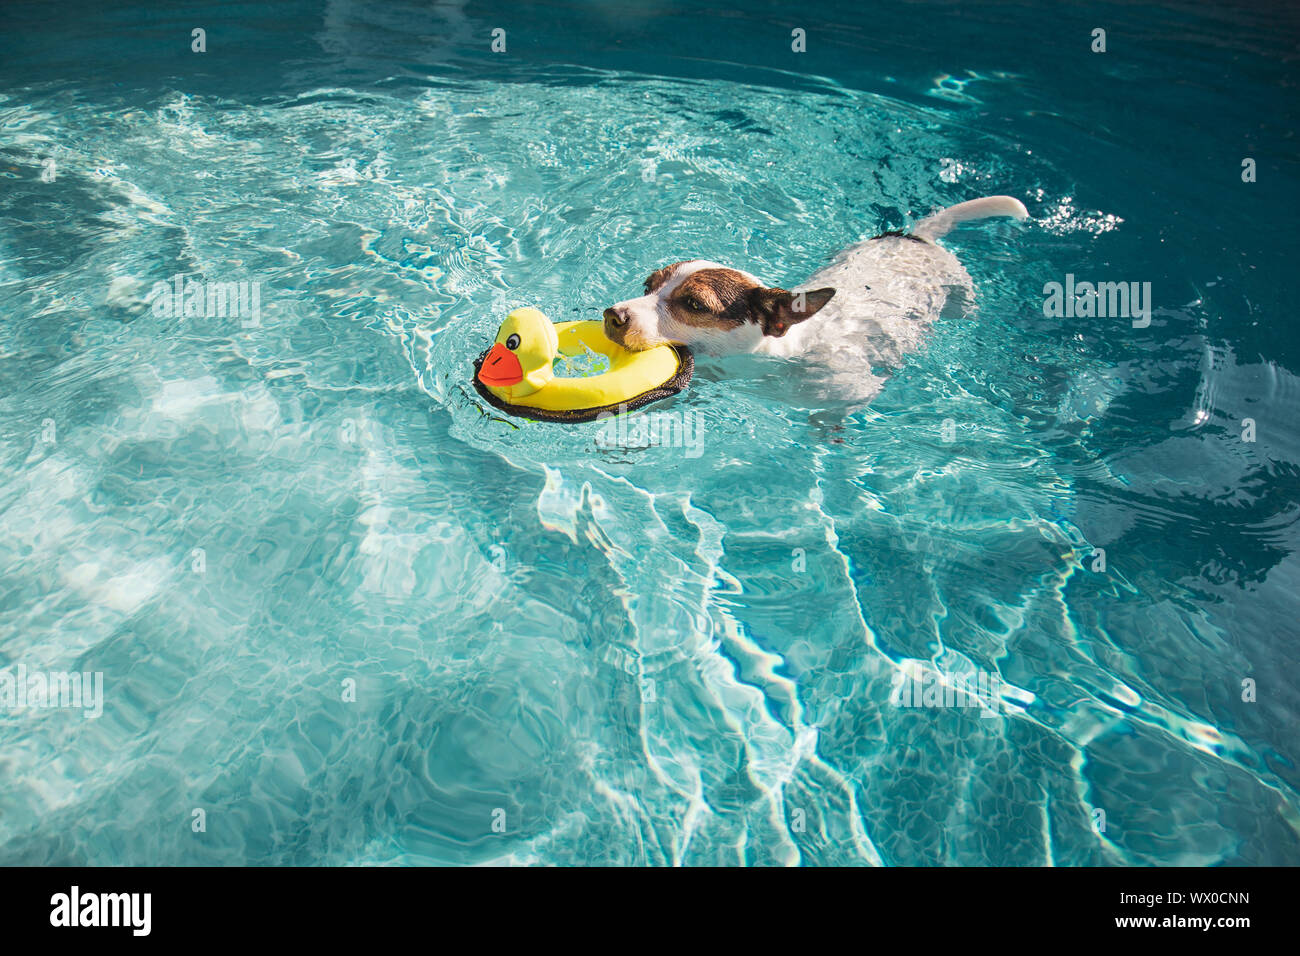 Dog swimming with toy in mouth Stock Photo